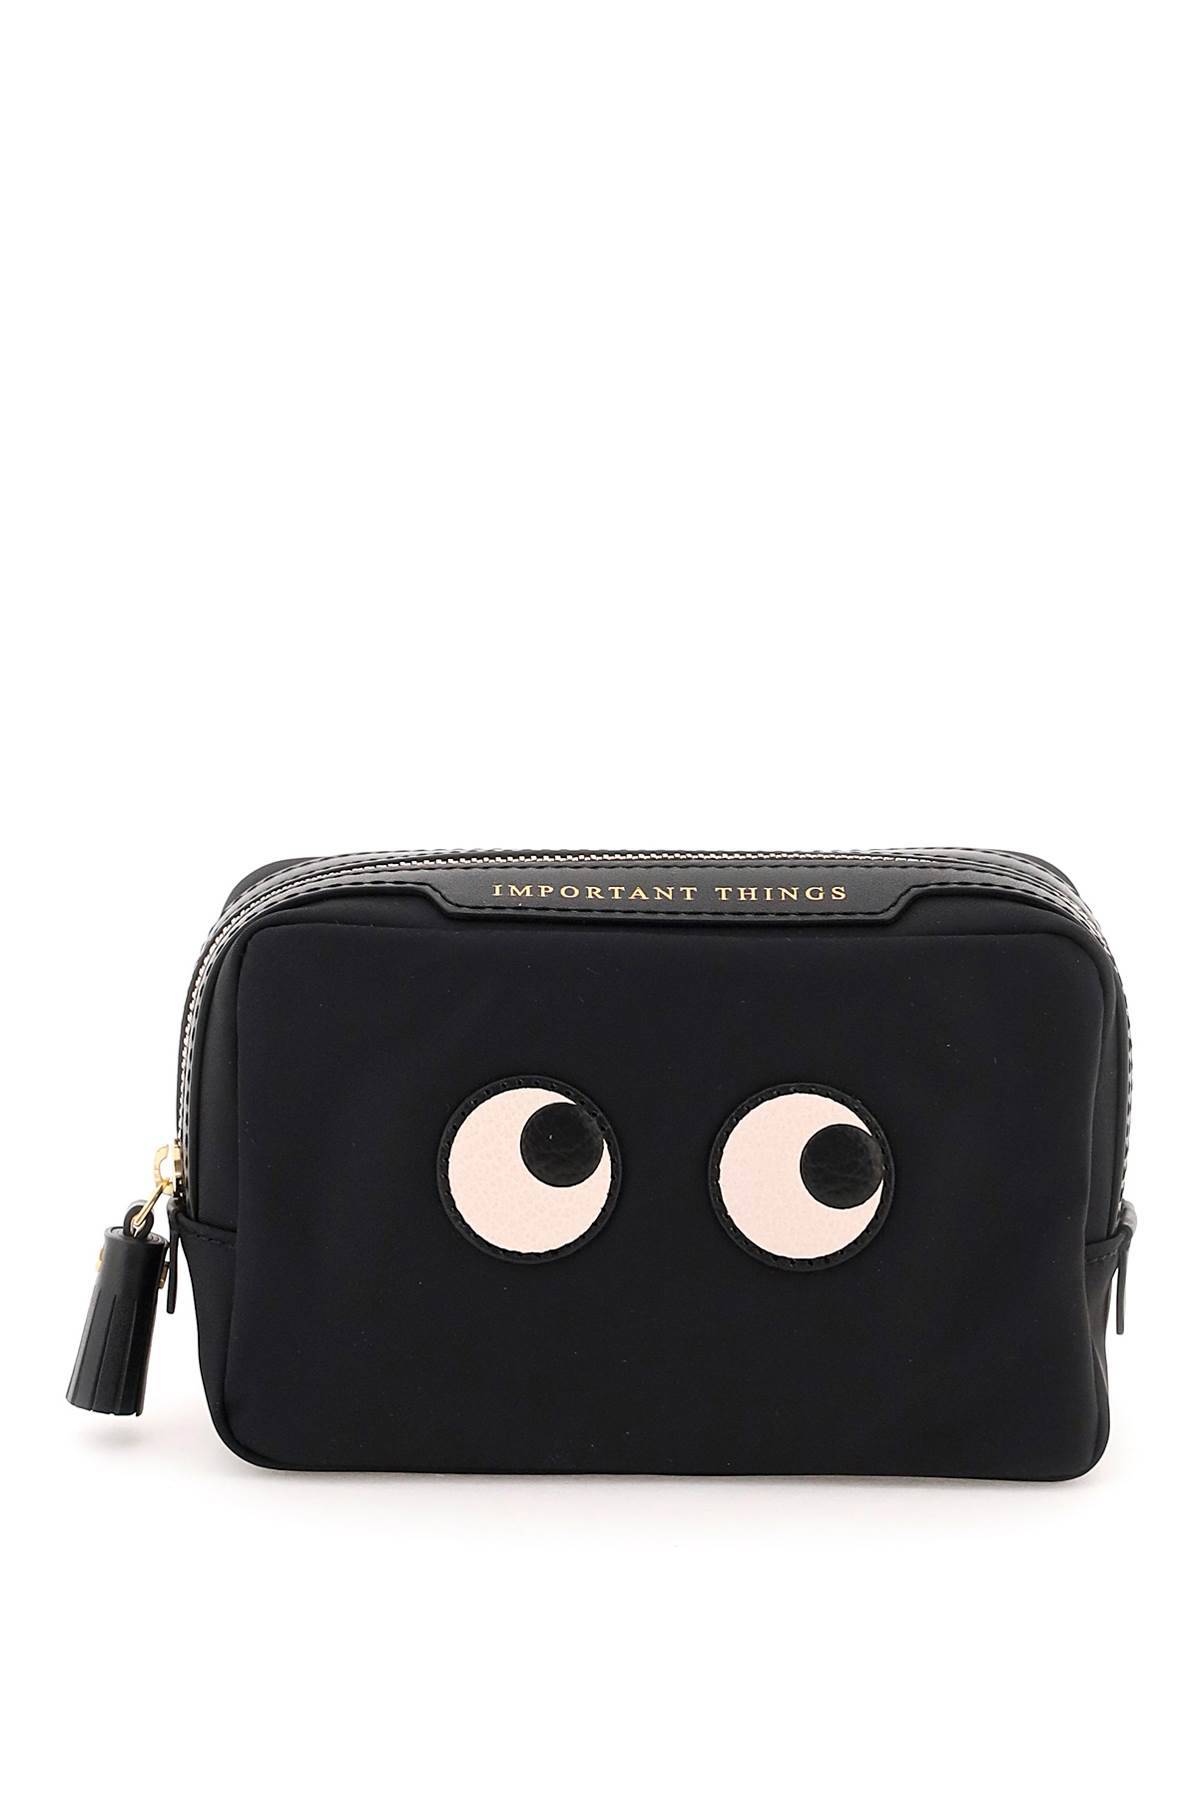 Anya Hindmarch ANYA HINDMARCH important things eyes pouch